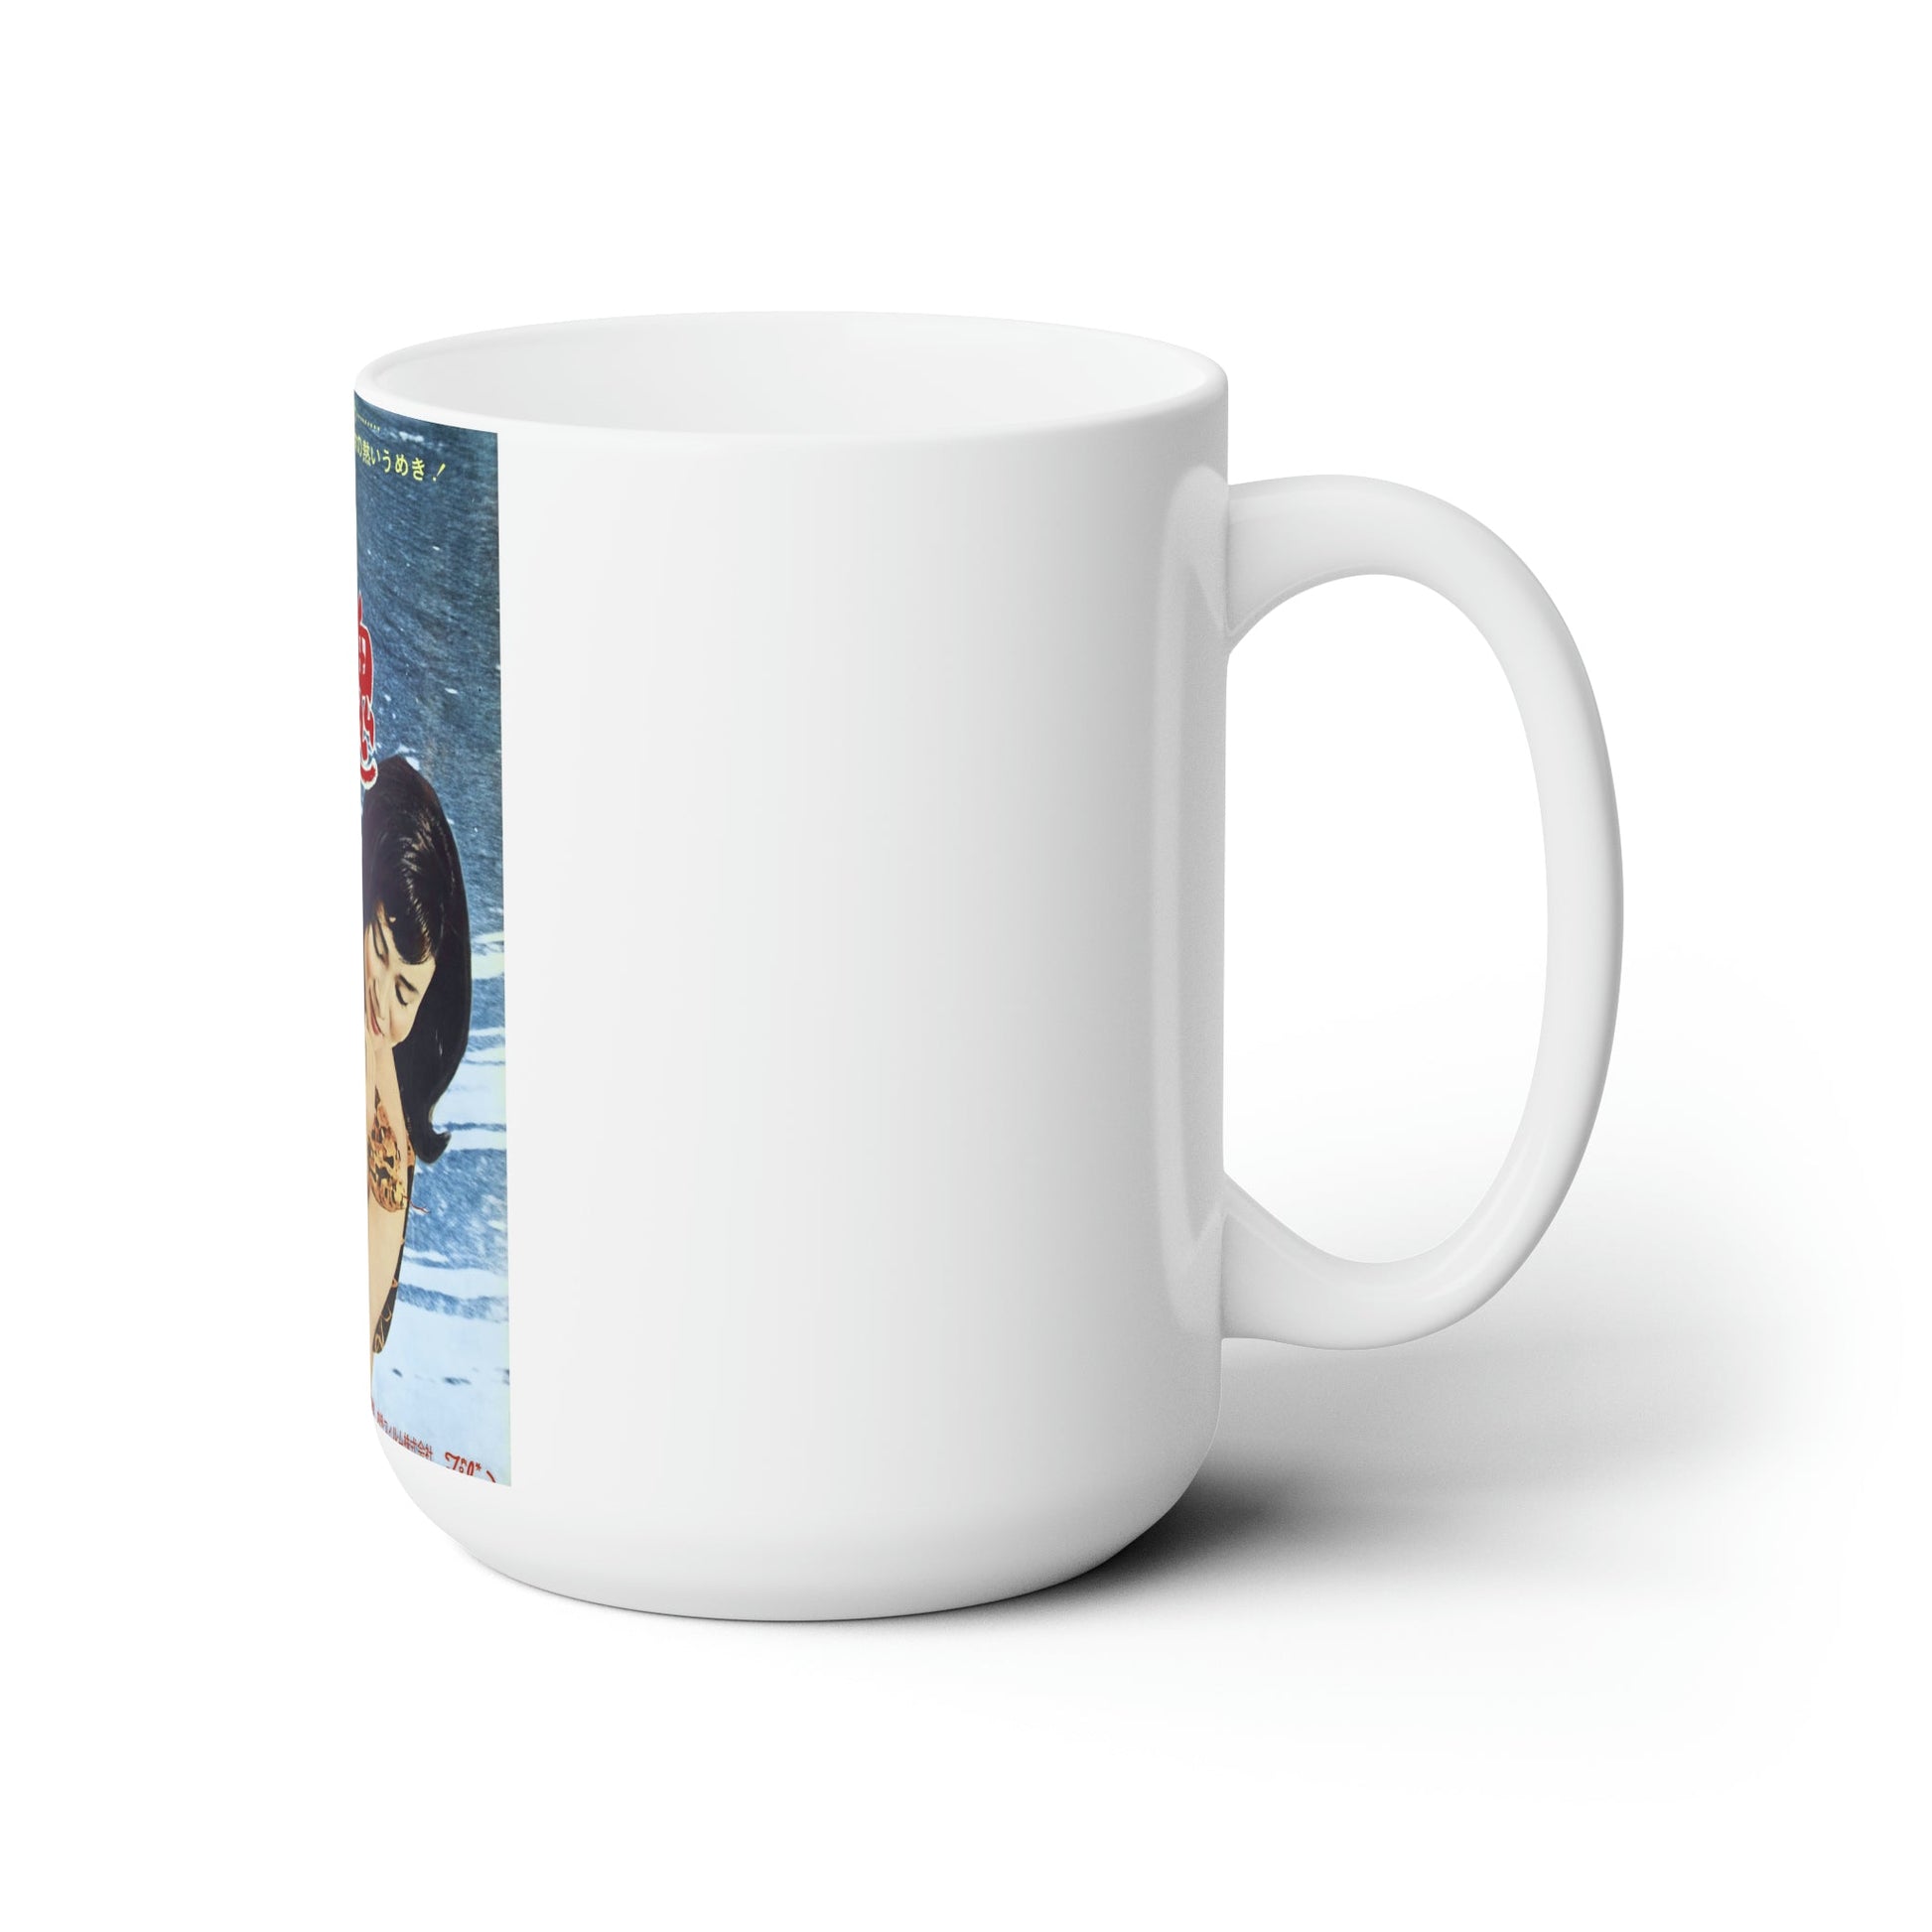 UNDERWATER NUDE PICTURES OF THE FLOATING WORLD SPIRIT OF THE SNAKE (ASIAN) Movie Poster - White Coffee Cup 15oz-15oz-The Sticker Space